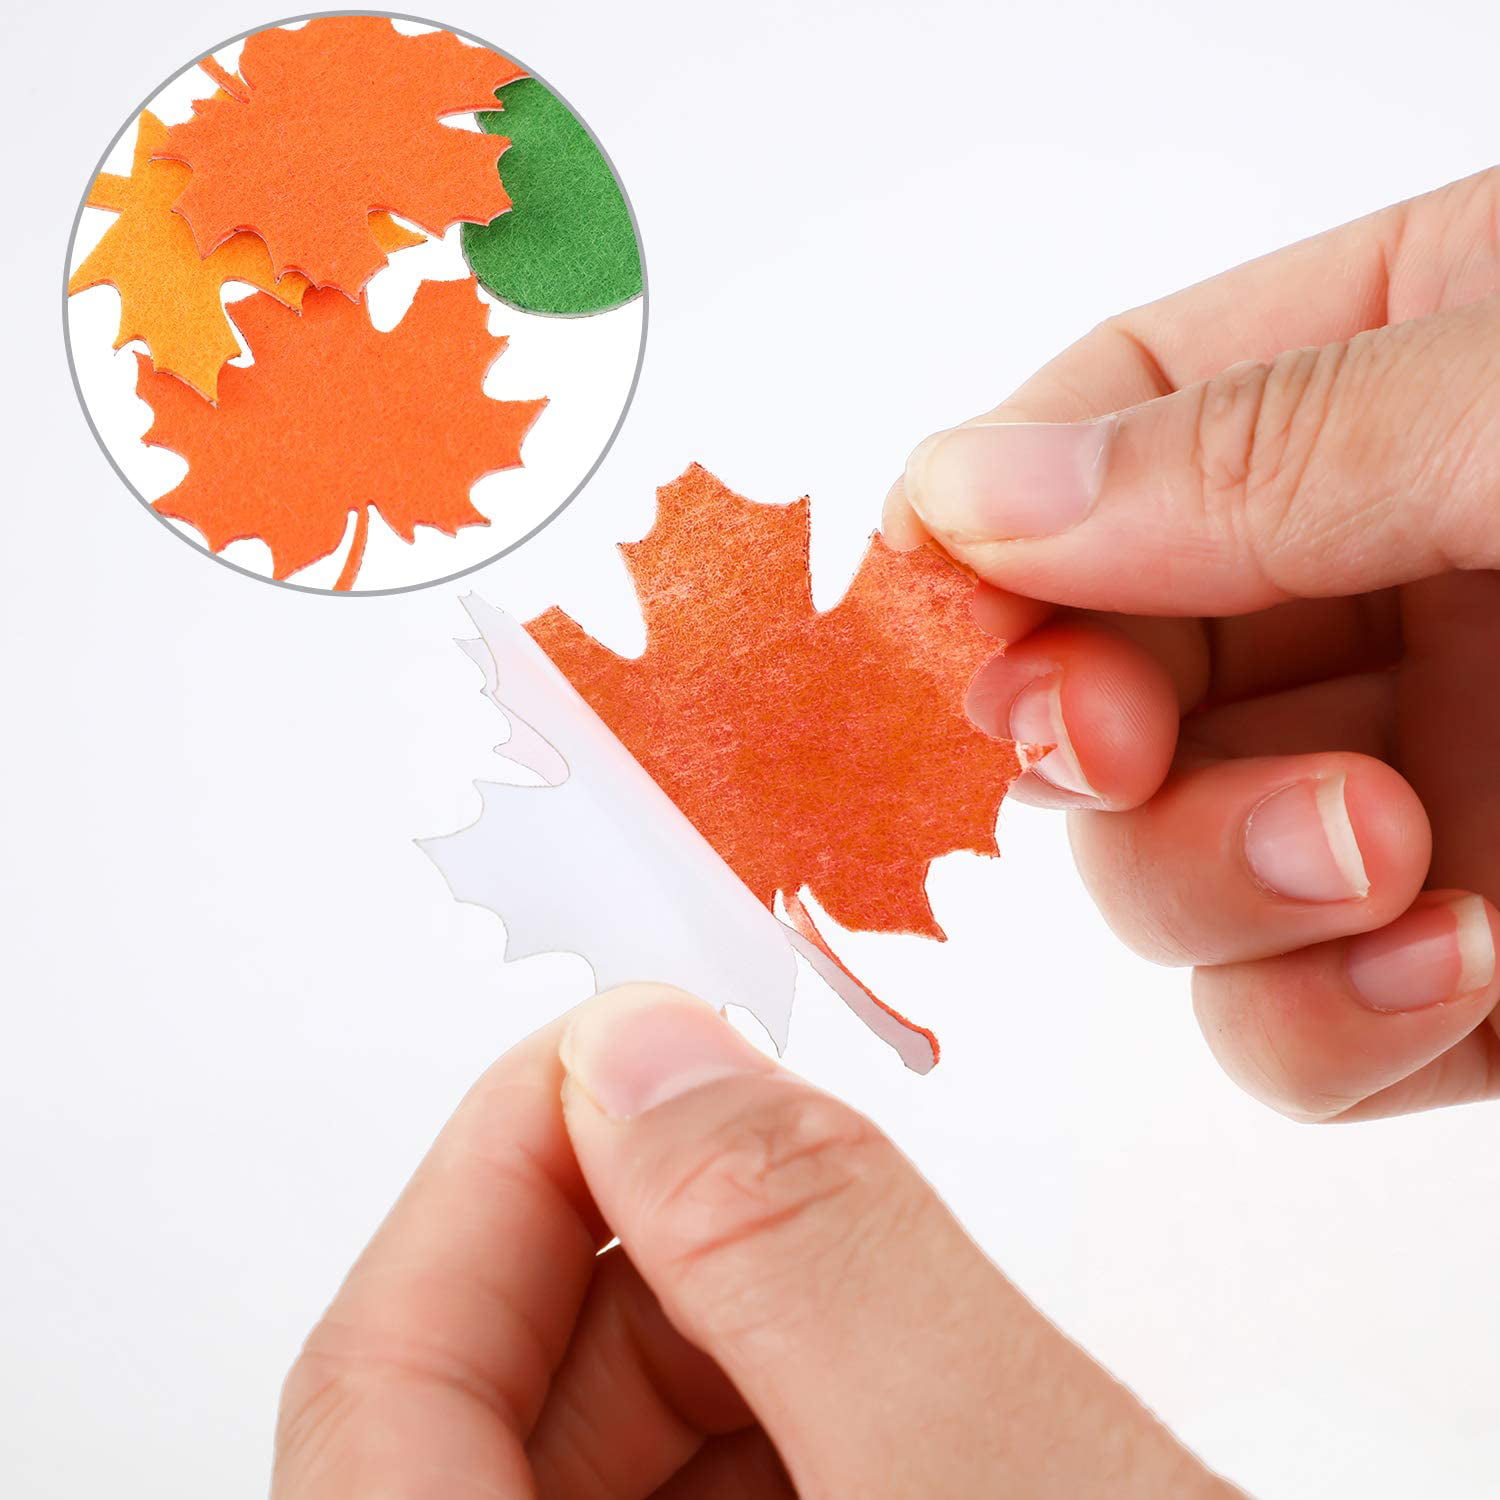 528 Pieces Leaf Stickers Felt Leaf Fall Stickers Maple Leaf Decals Assorted Autumn Leaf Decorations for Thanksgiving Party Craft Ornaments